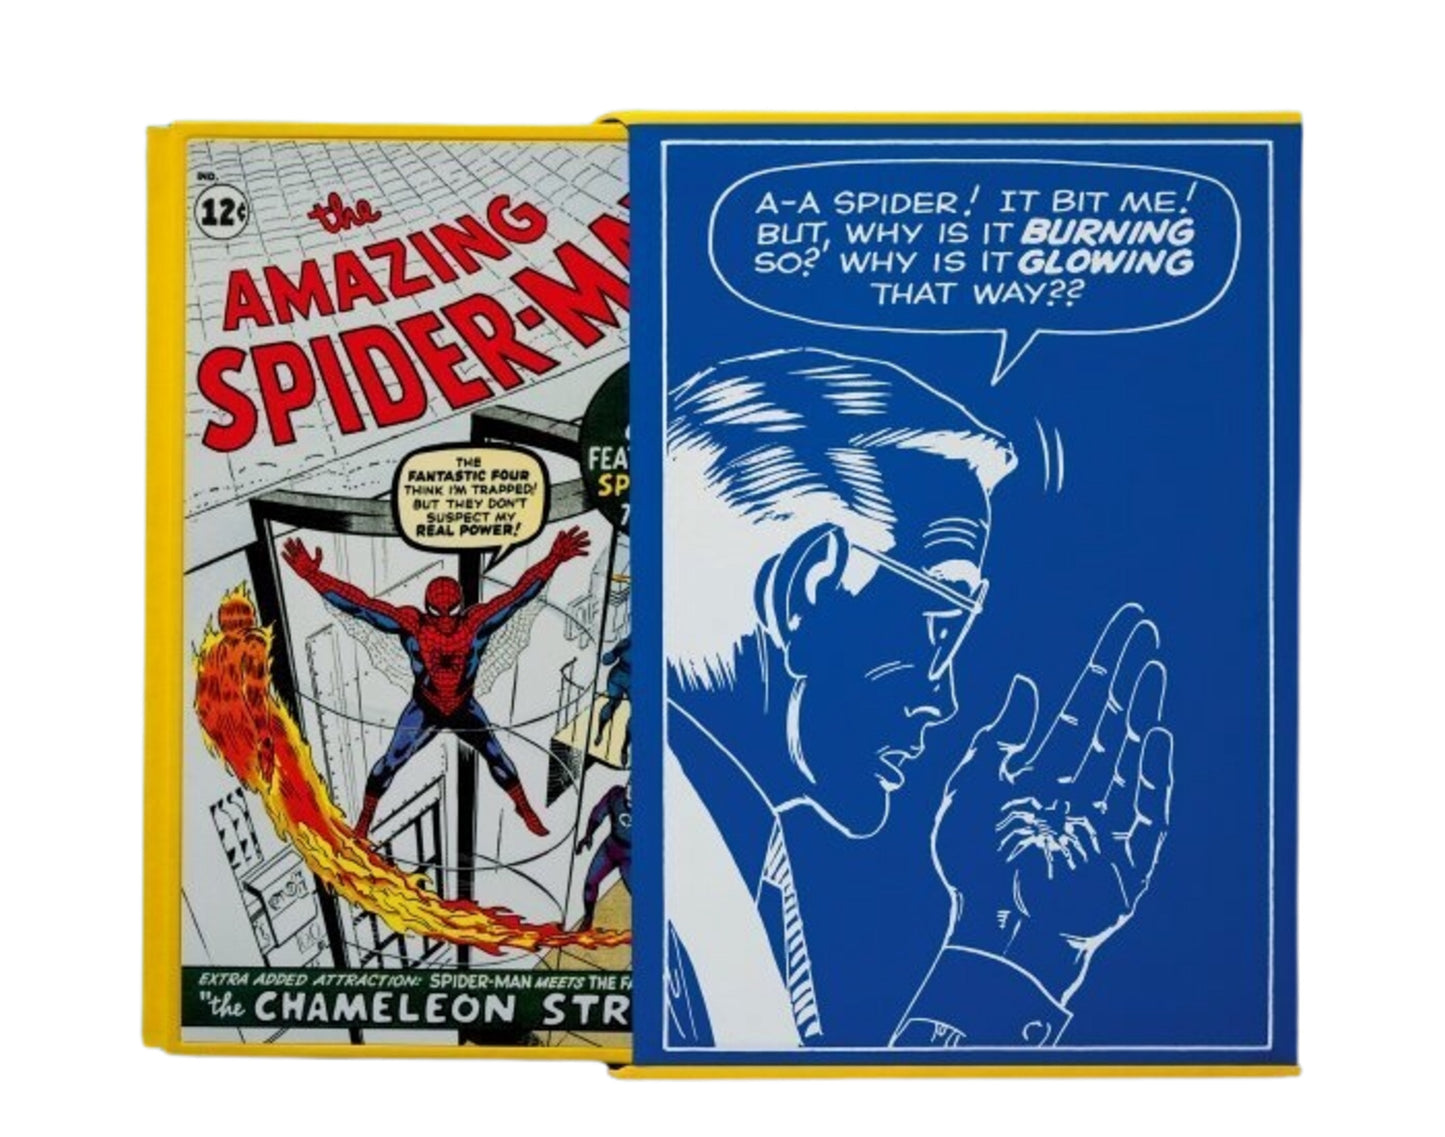 Taschen Books - Marvel Comics Library - Spider-Man. Vol. 1. 1962–1964 - Edition of 1,000 Hardcover Book